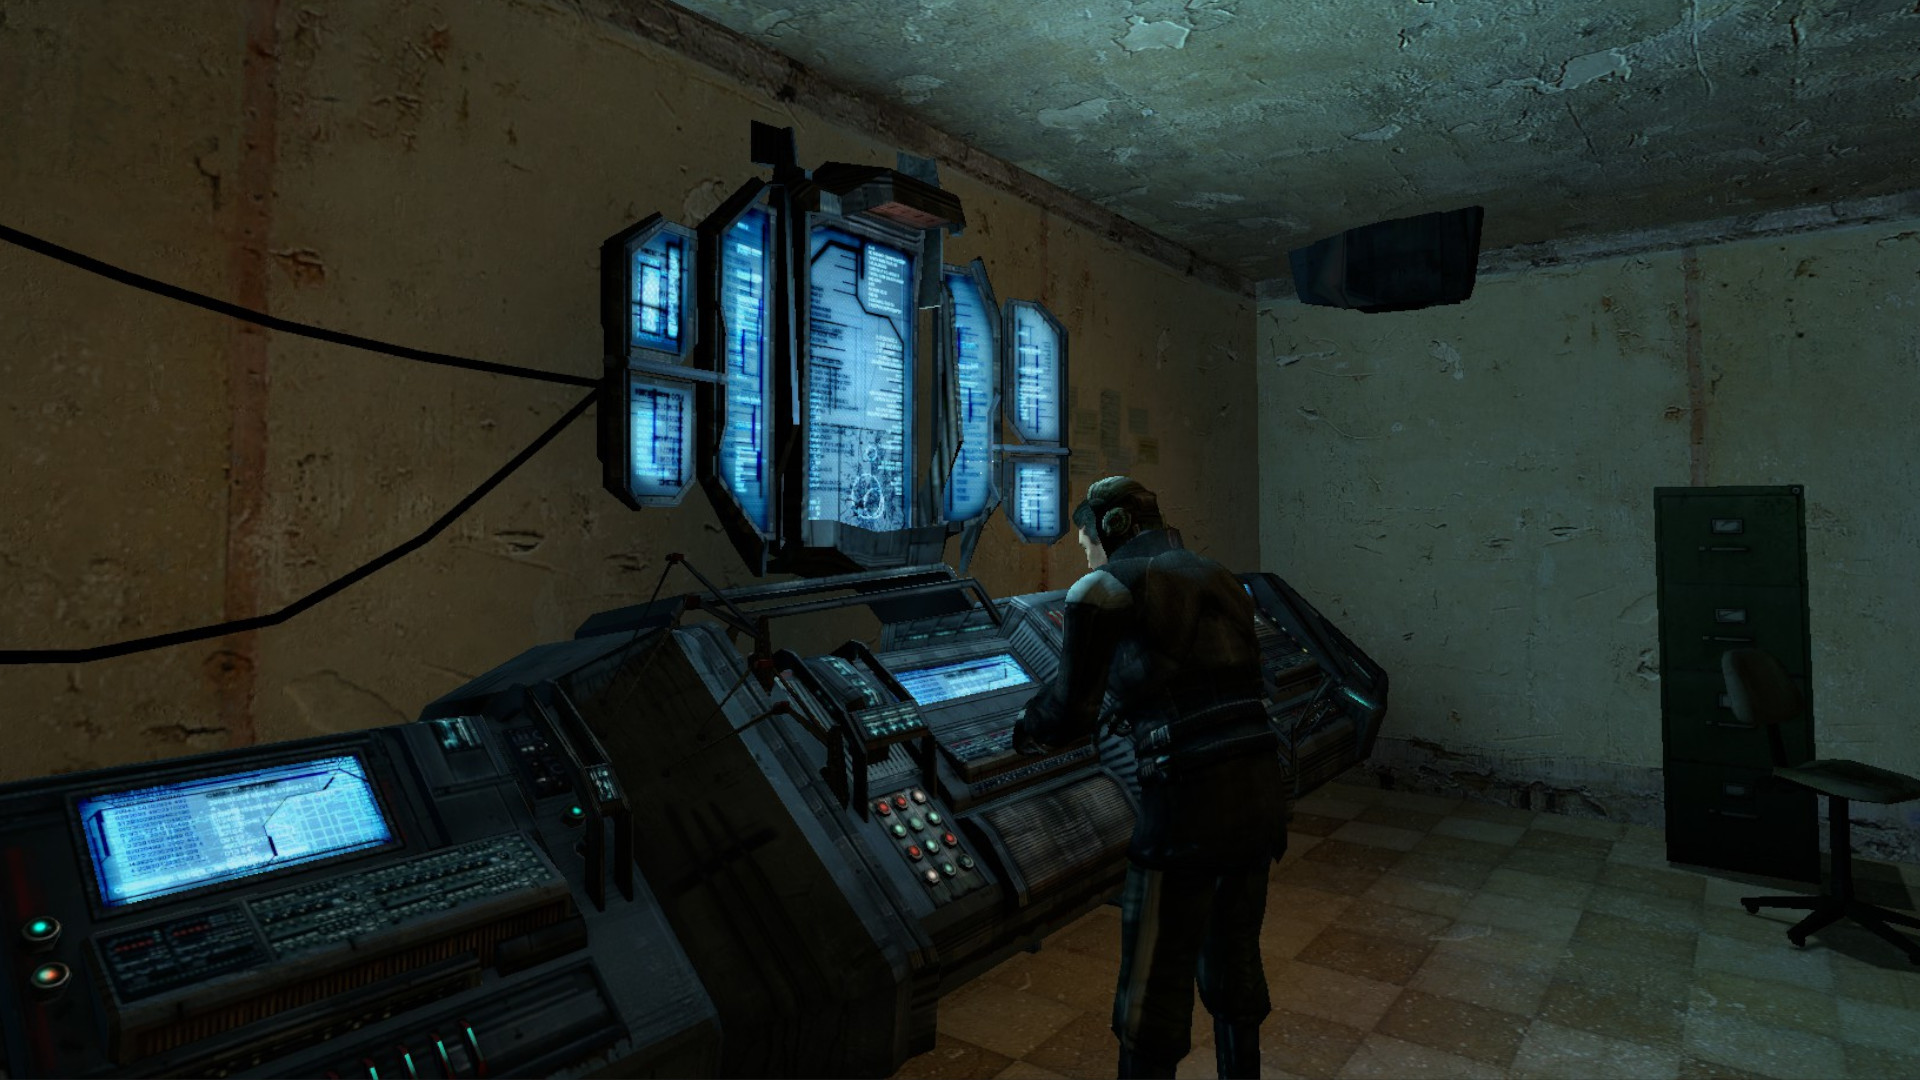 Half-Life 2 Episode 1: Barney, a security guard, communicates with Doctor Kleiner via a futuristic computer with a large blue multi-panel display.